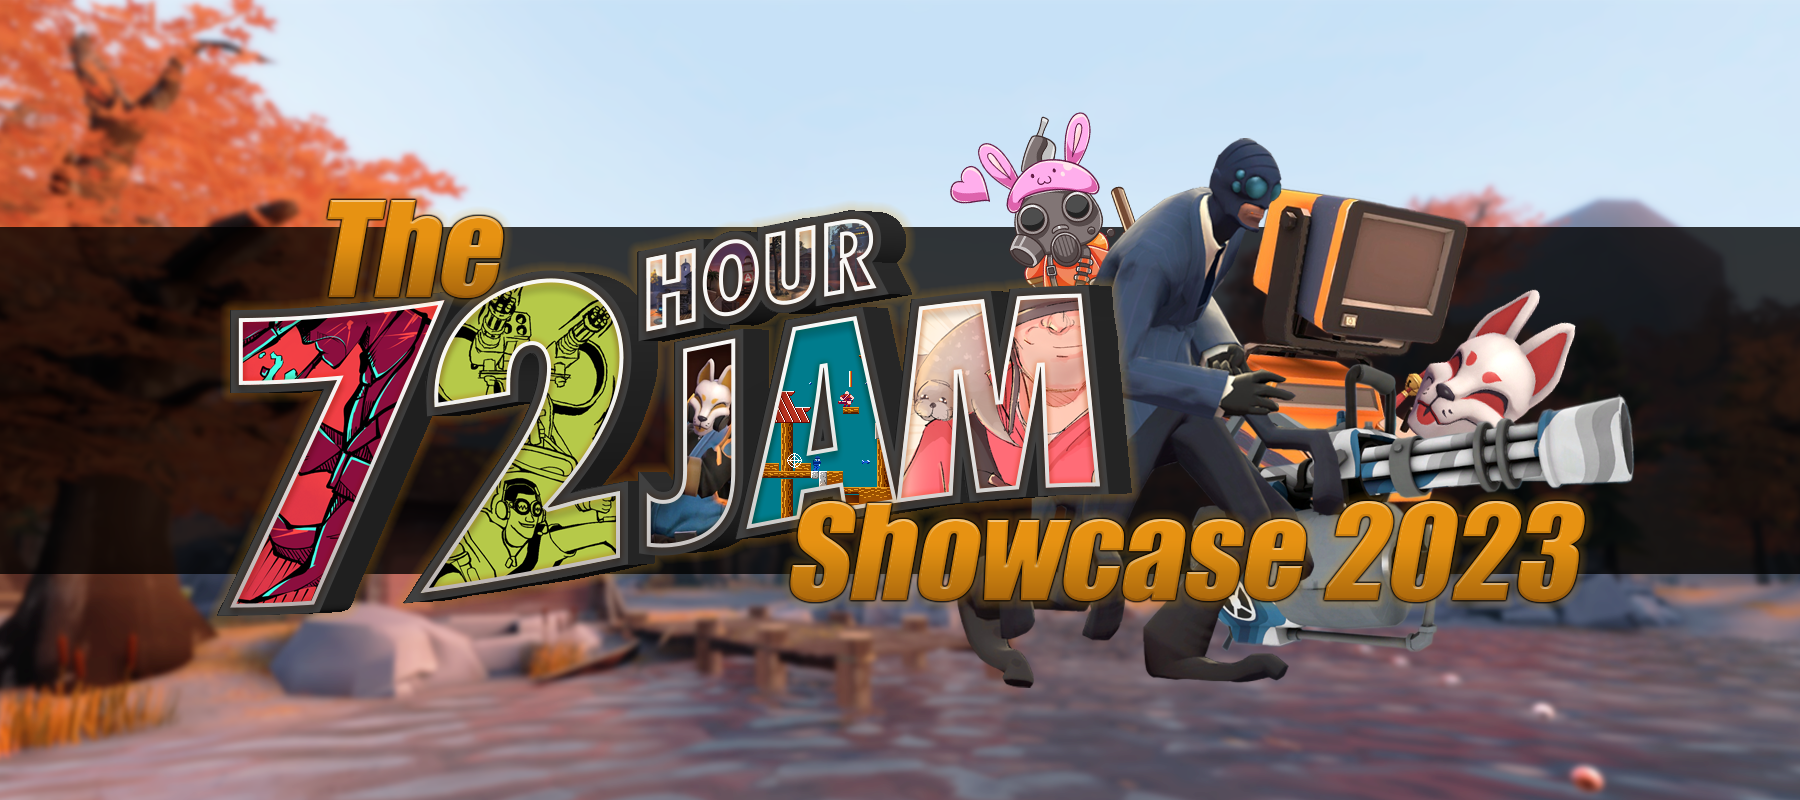 showcase2023 banner.png